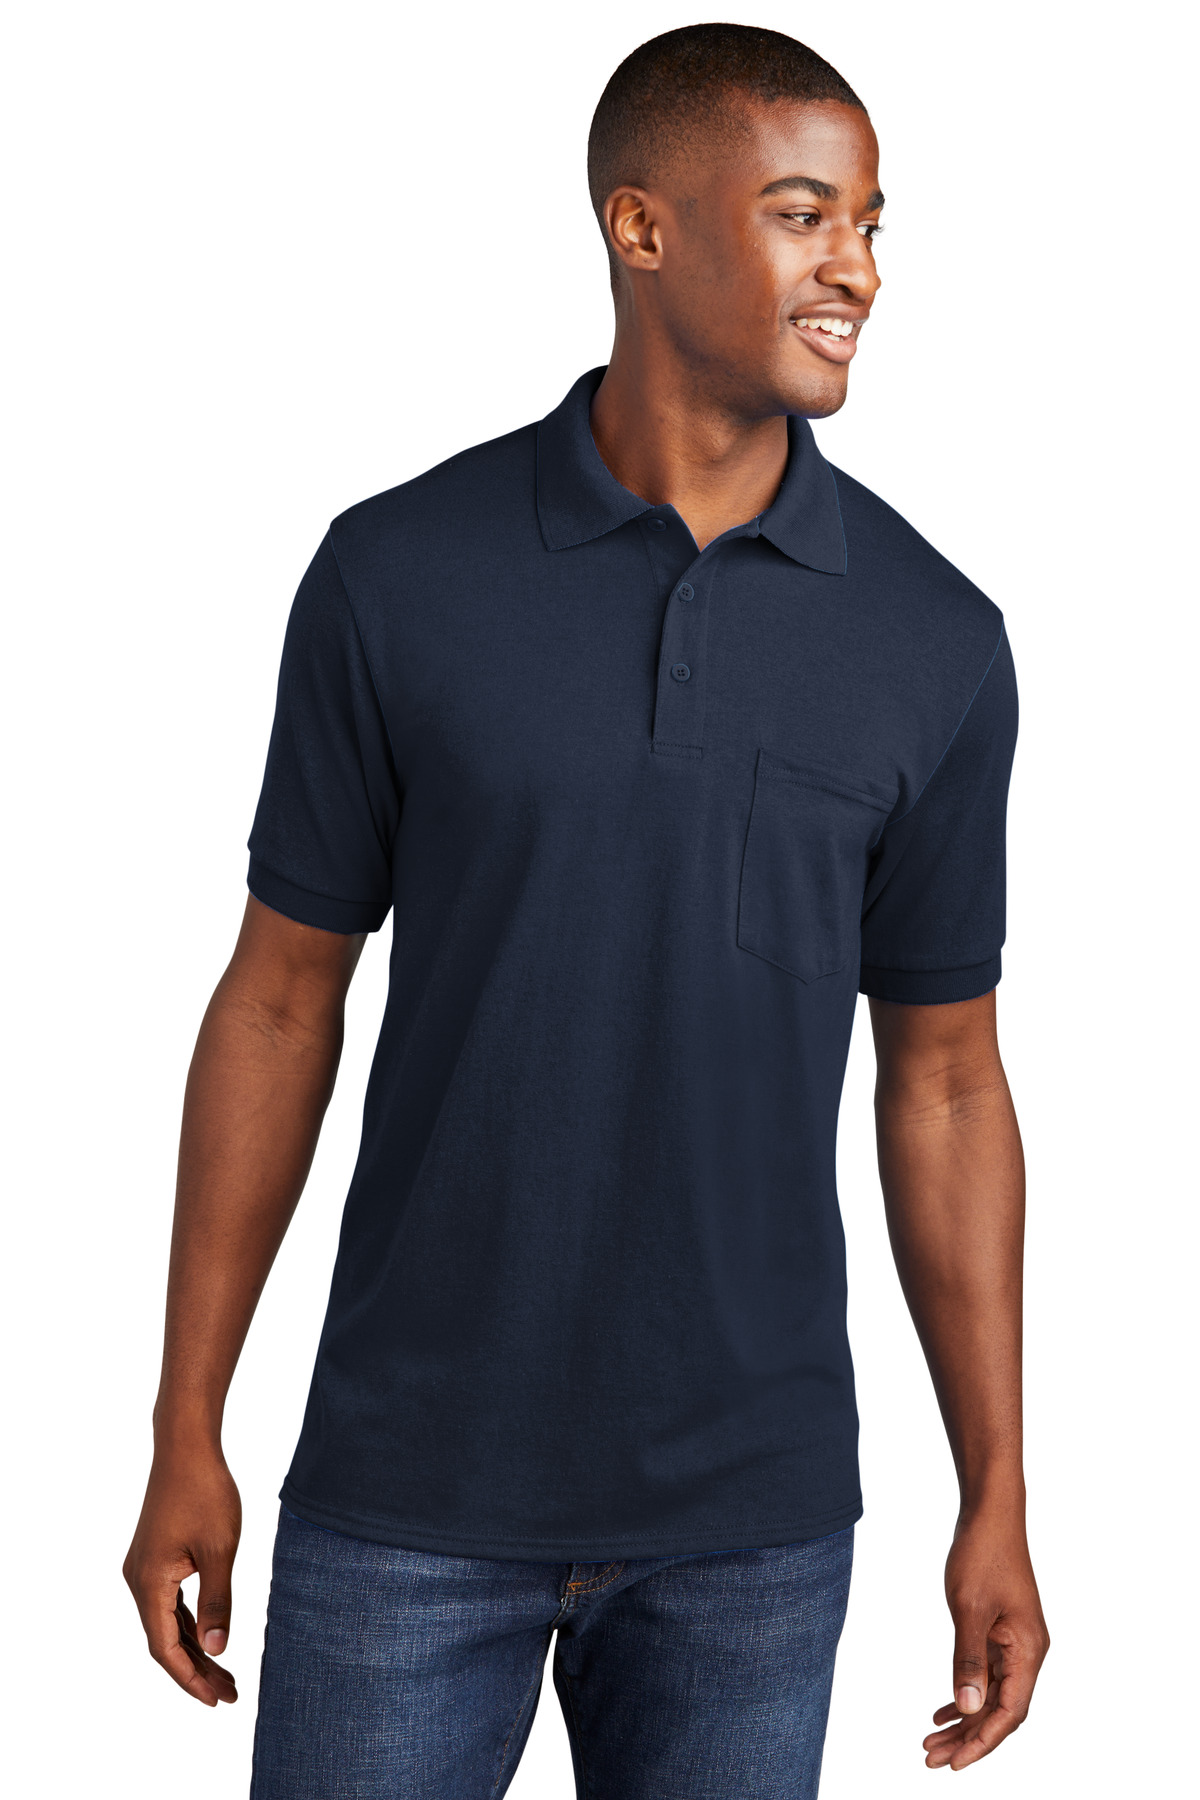 Port and Company Core Blend Jersey Knit Pocket Polo. KP55P